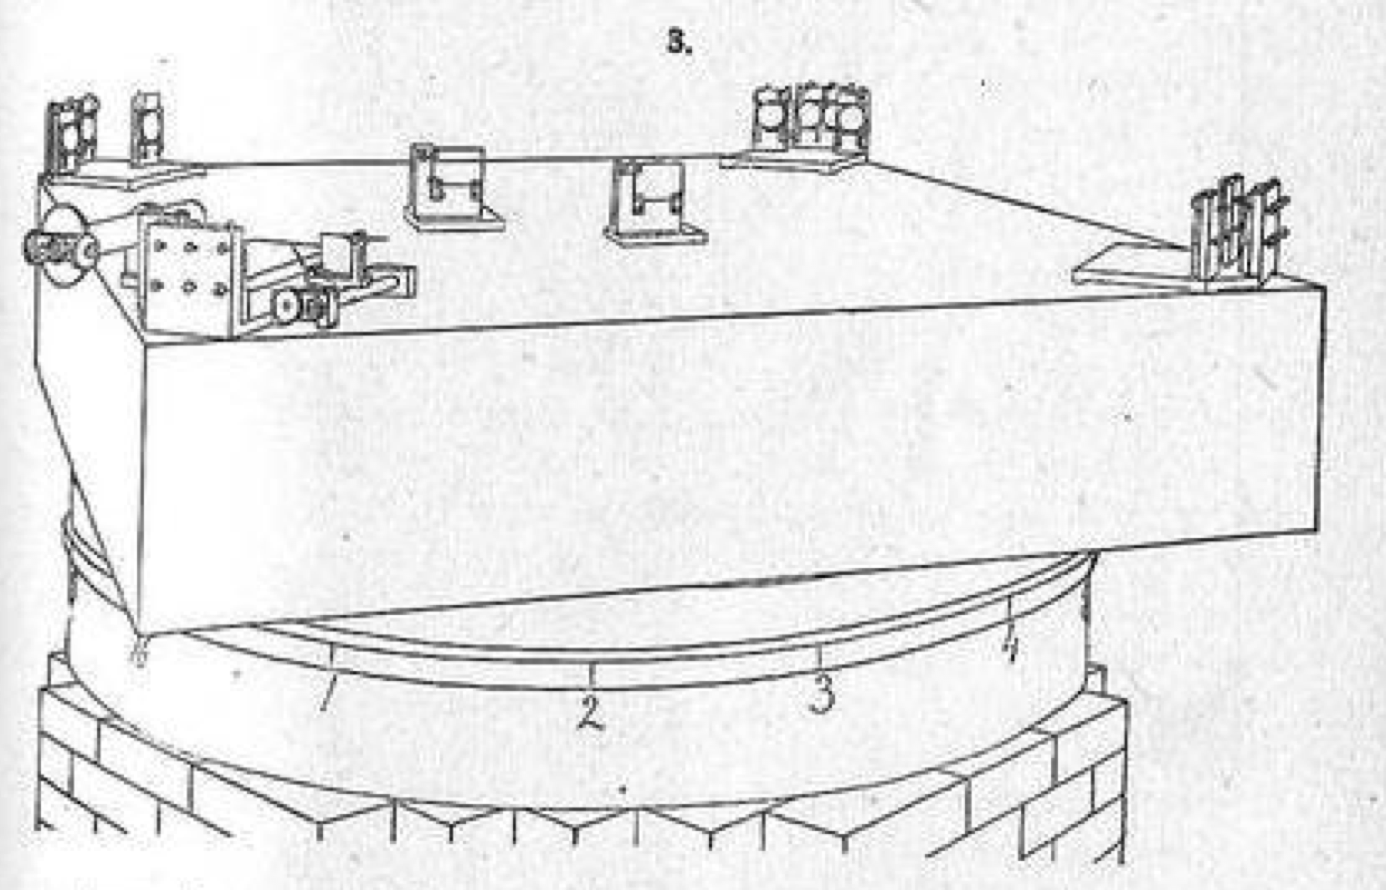 Perspective drawing of the experimental apparatus used in Michelson and Morley’s 1887 experiment to measure the speed of the Earth’s revolution around the sun. Optical equipment is mounted on a massive stone (edge length 1.5 meters) floating in a bath of mercury contained in a circular cast-iron trough. Michelson and Morley (1887).